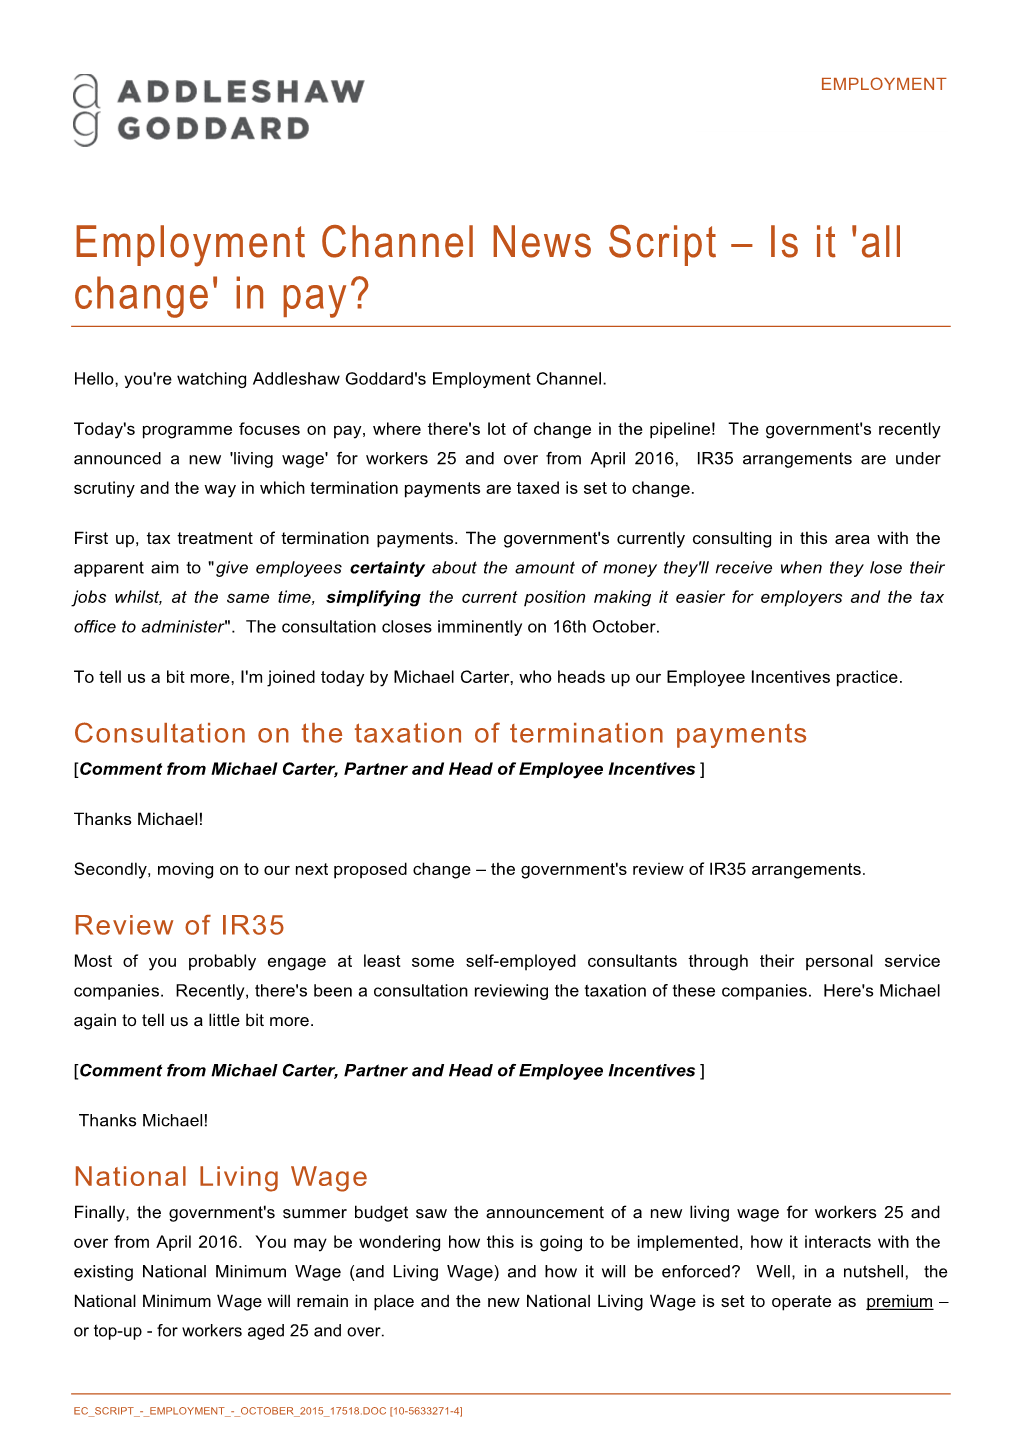 Employment Channel News Script – Is It 'All Change' in Pay?